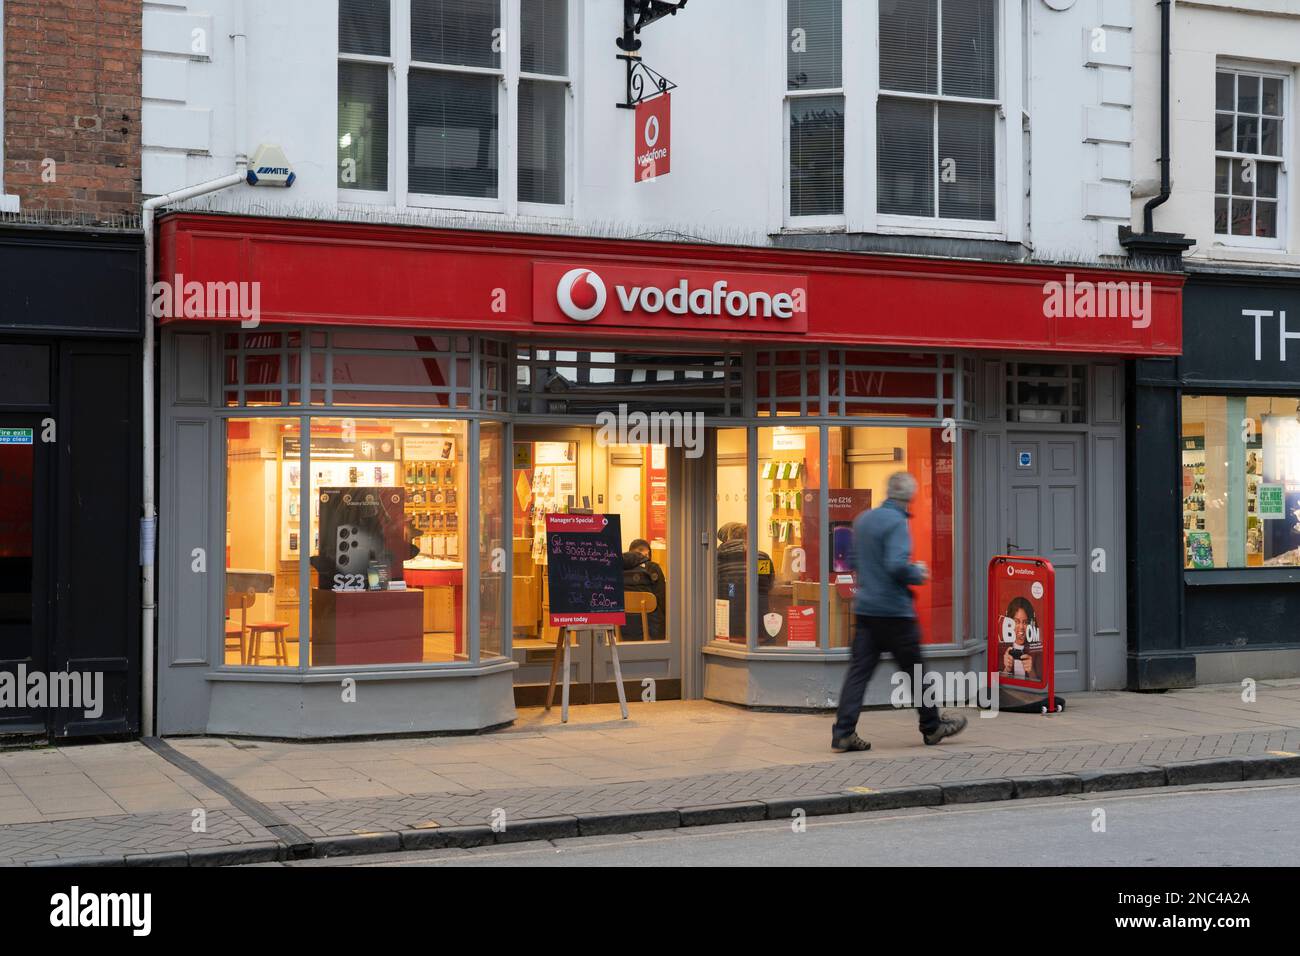 A man walks past the exterior of a Vodafone store on the High Street in Stratford upon Avon, England. Concept: telecoms industry, telecommunications Stock Photo